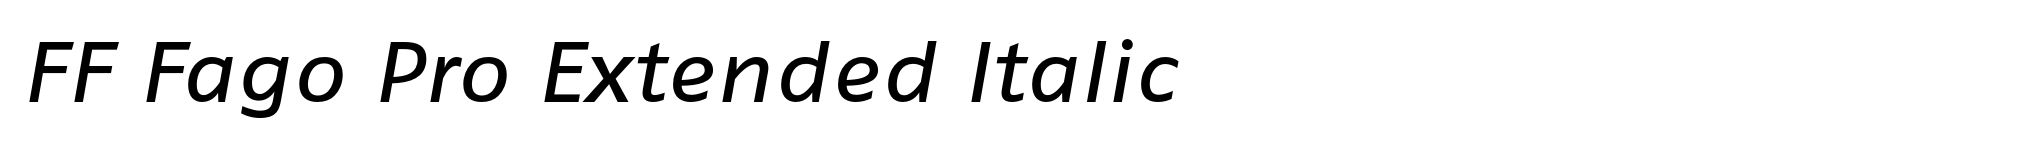 FF Fago Pro Extended Italic image